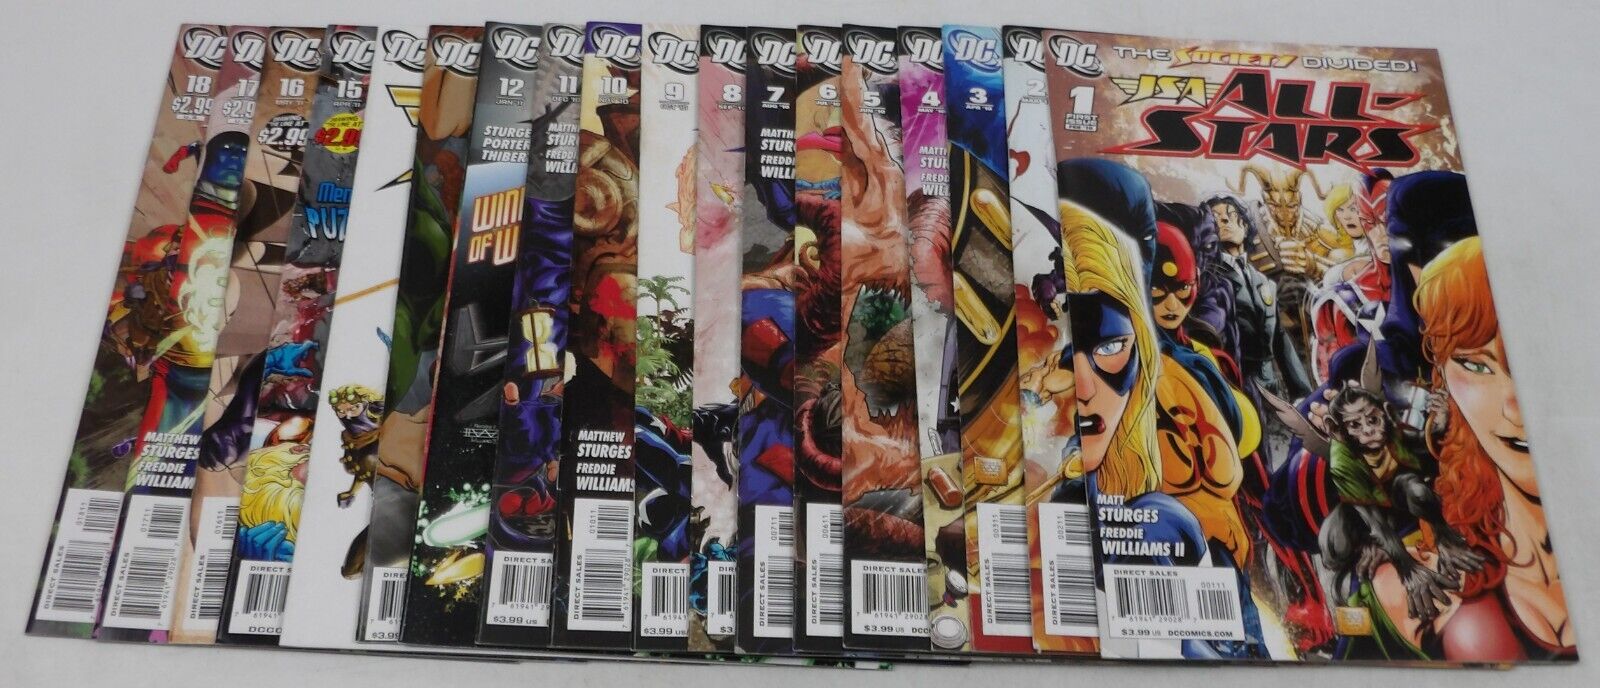 JSA All-Stars Vol. 2 #1-18 VF/NM complete series Justice Society of America 2010